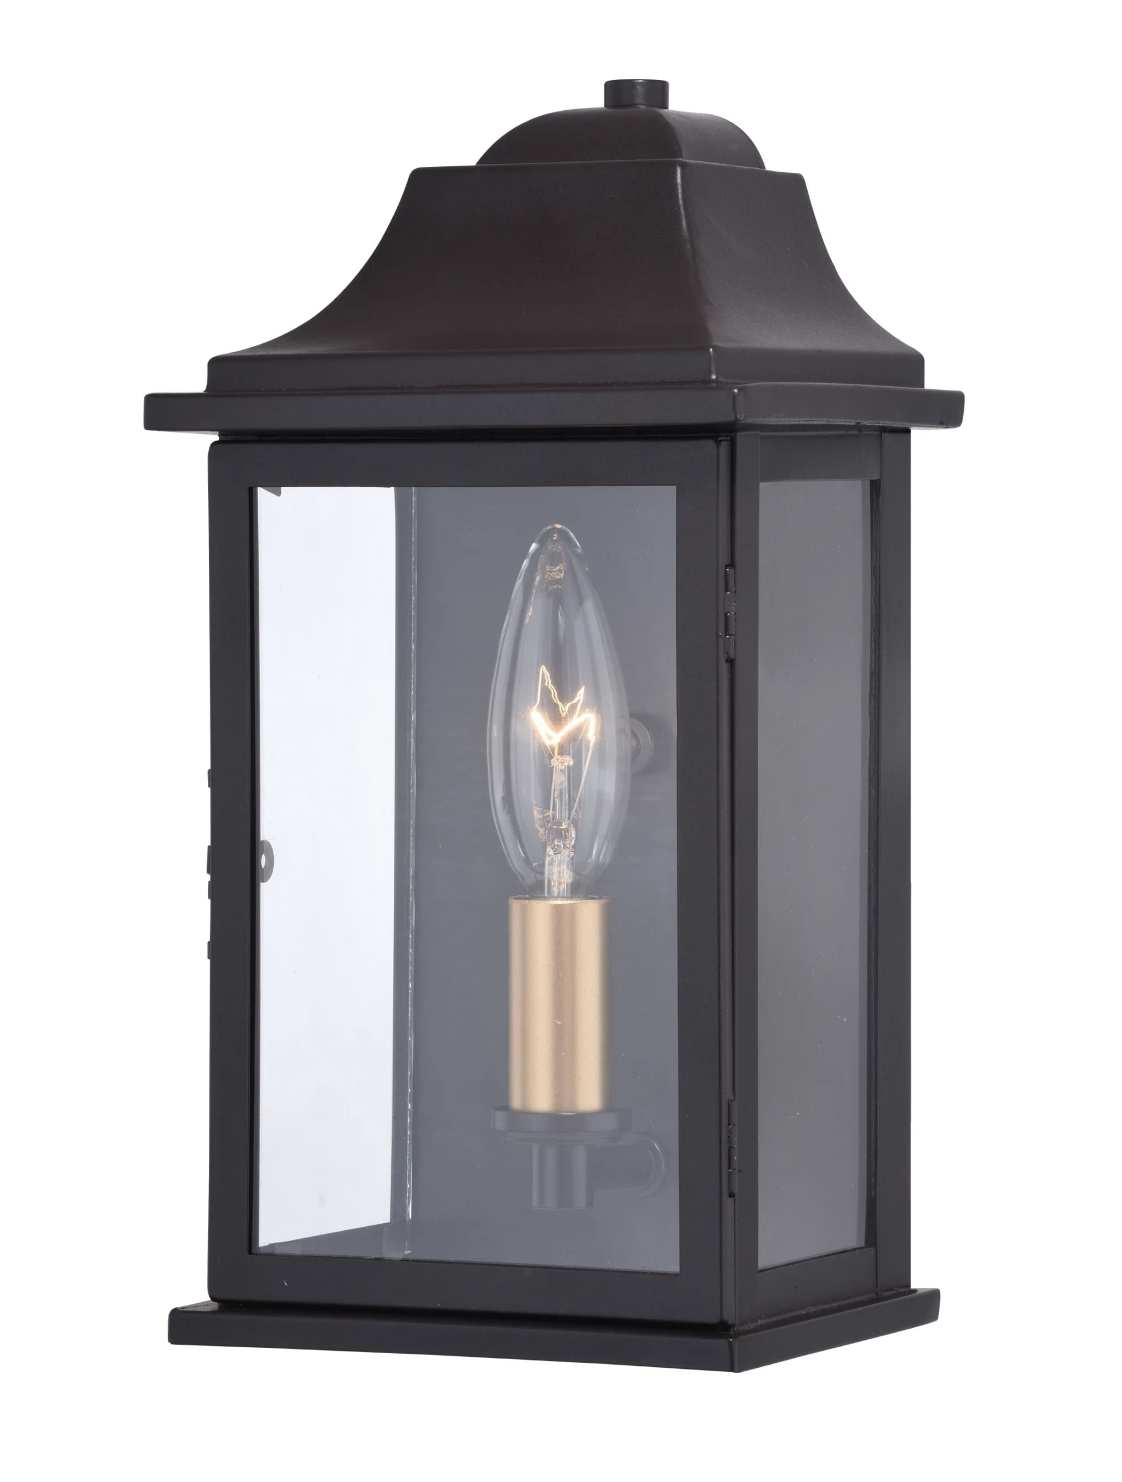 Bellevue Brooklyn Outdoor Wall Sconce and Additional Outdoor Lighting Image